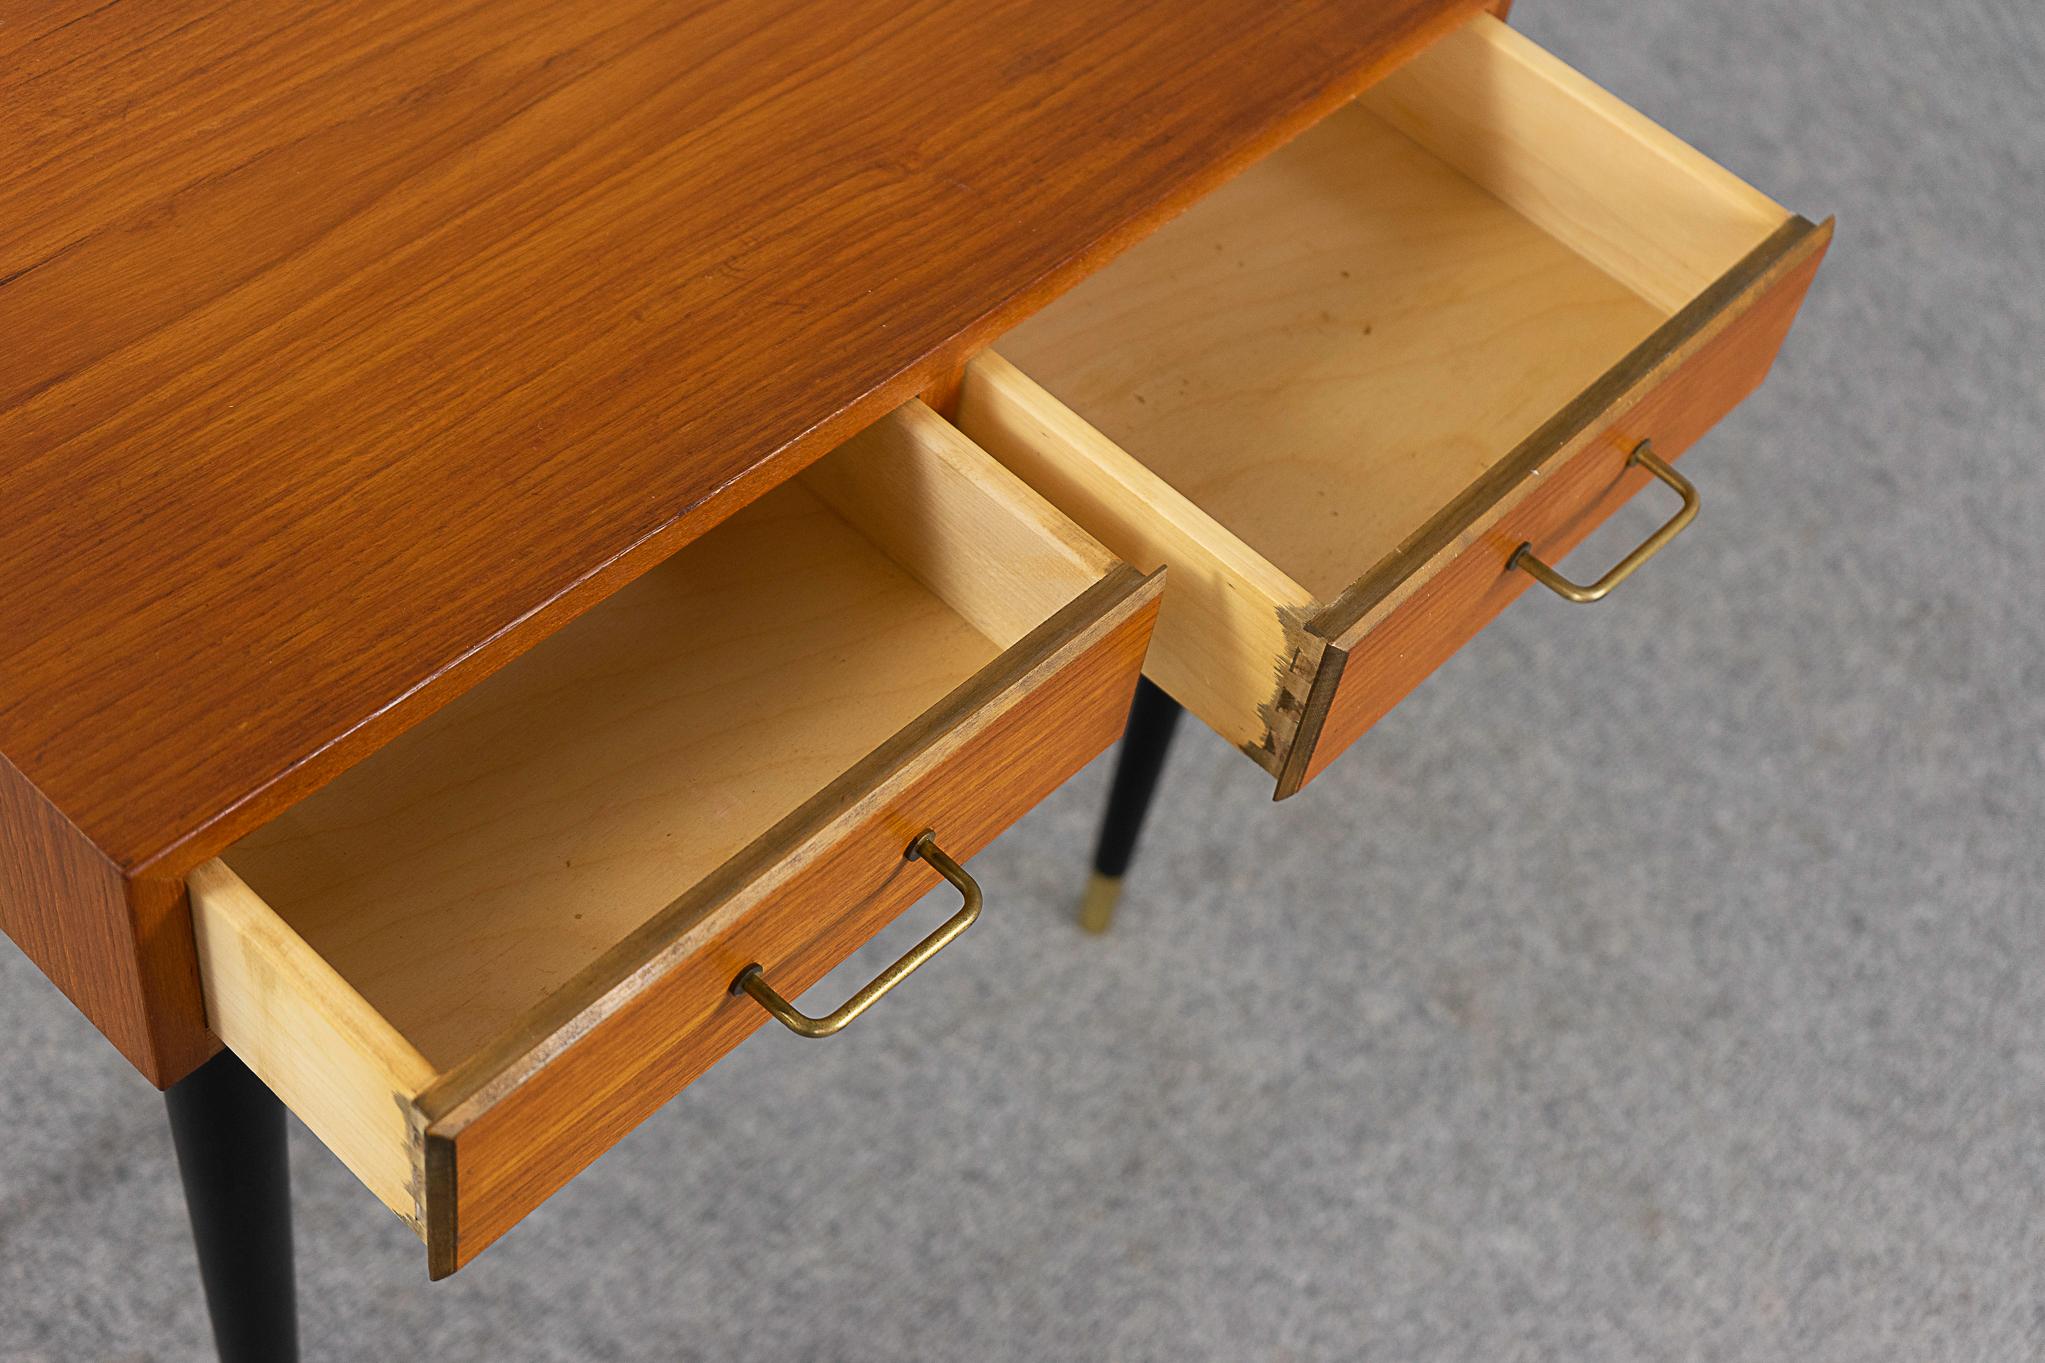 Teak mid-century bedside table, circa 1960's. Slender contrasting legs, dovetail drawers with metal pulls, beautifully veneered case. One metal foot cap missing. 

Please inquire for remote and international shipping rates.